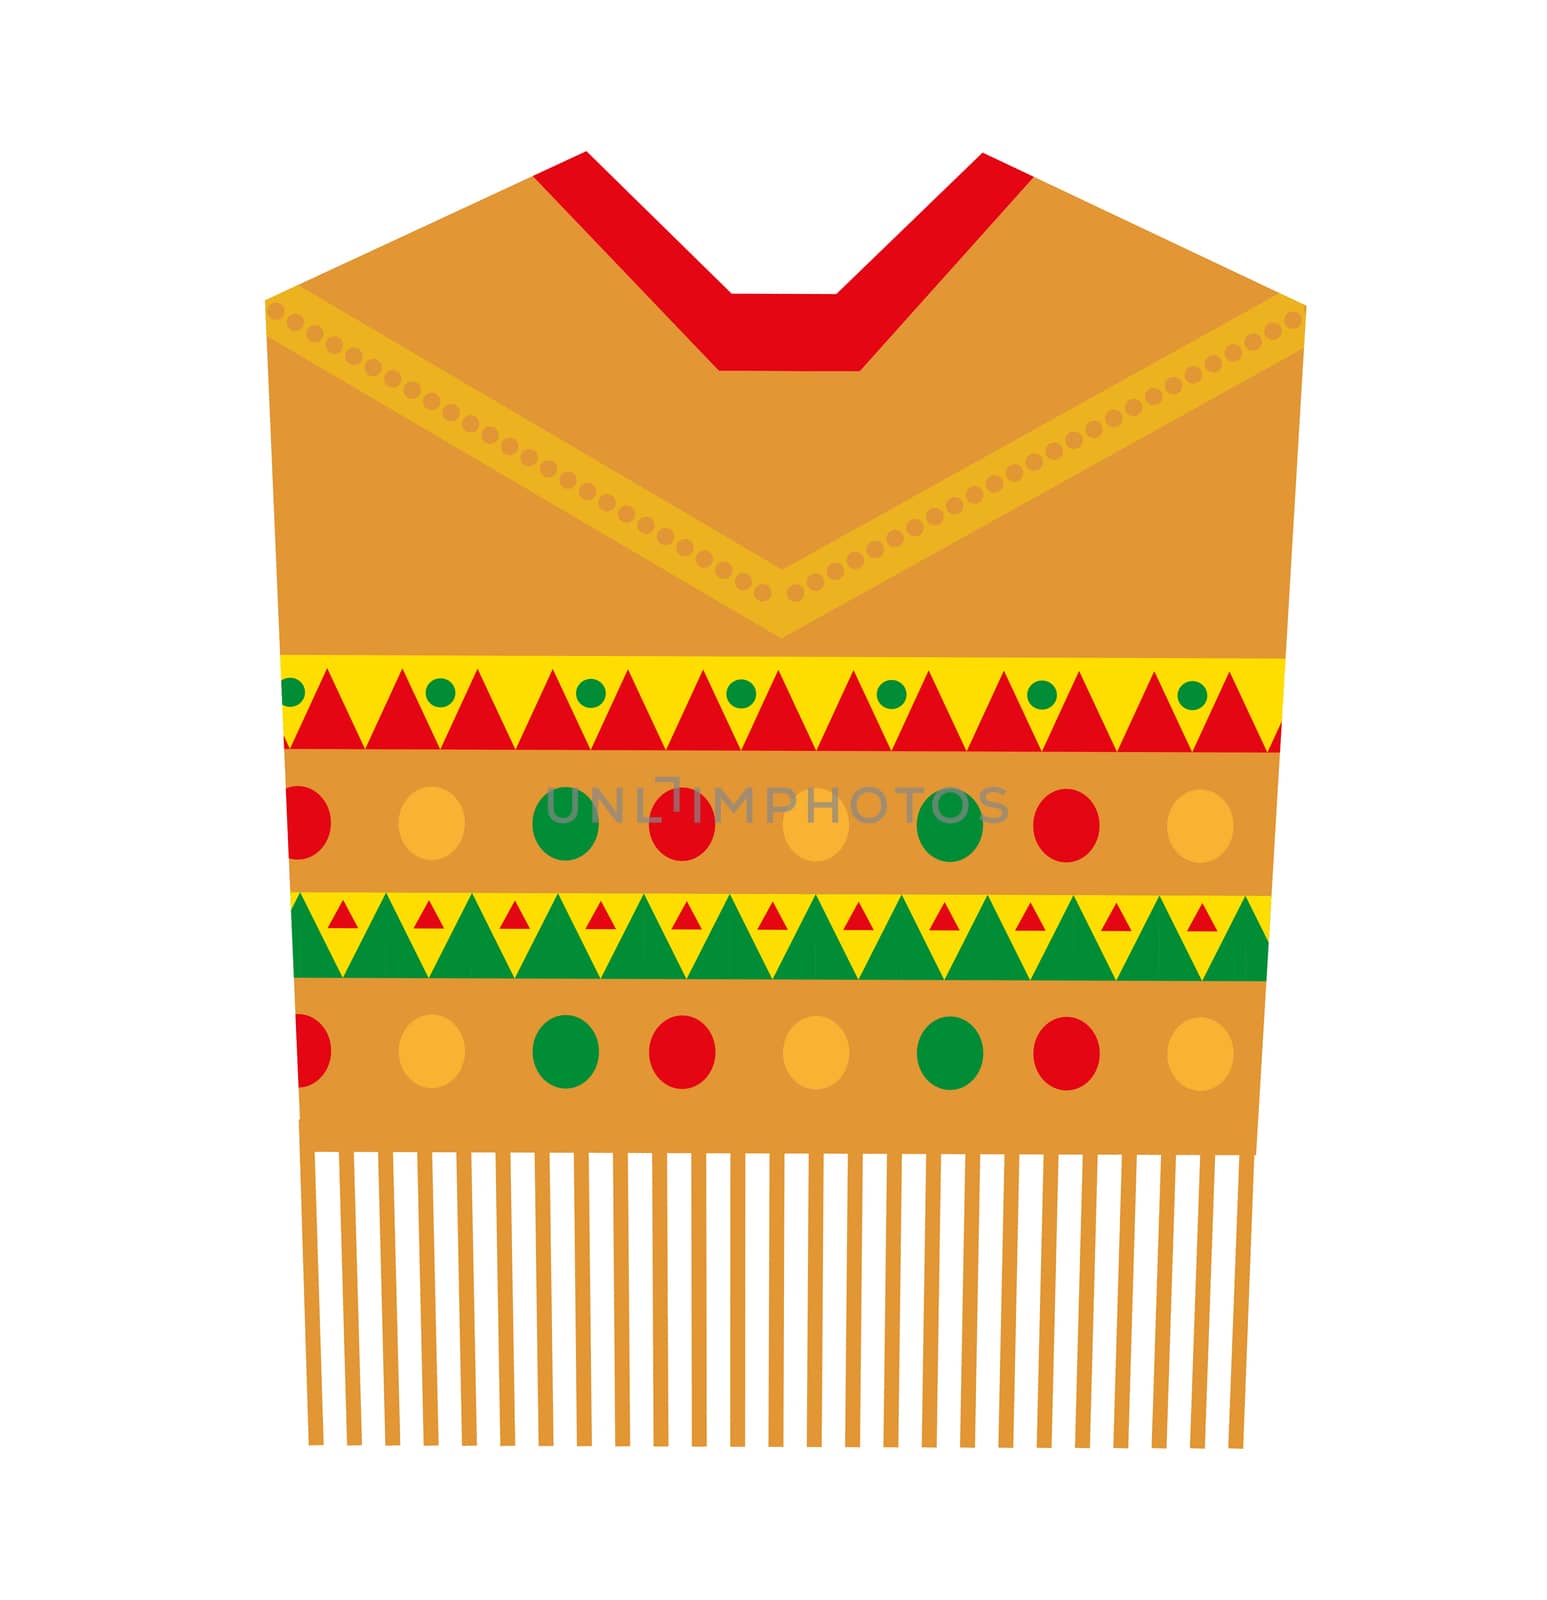 Poncho icon, flat style. Mexican traditional clothing. Isolated on white background. illustration, clip-art